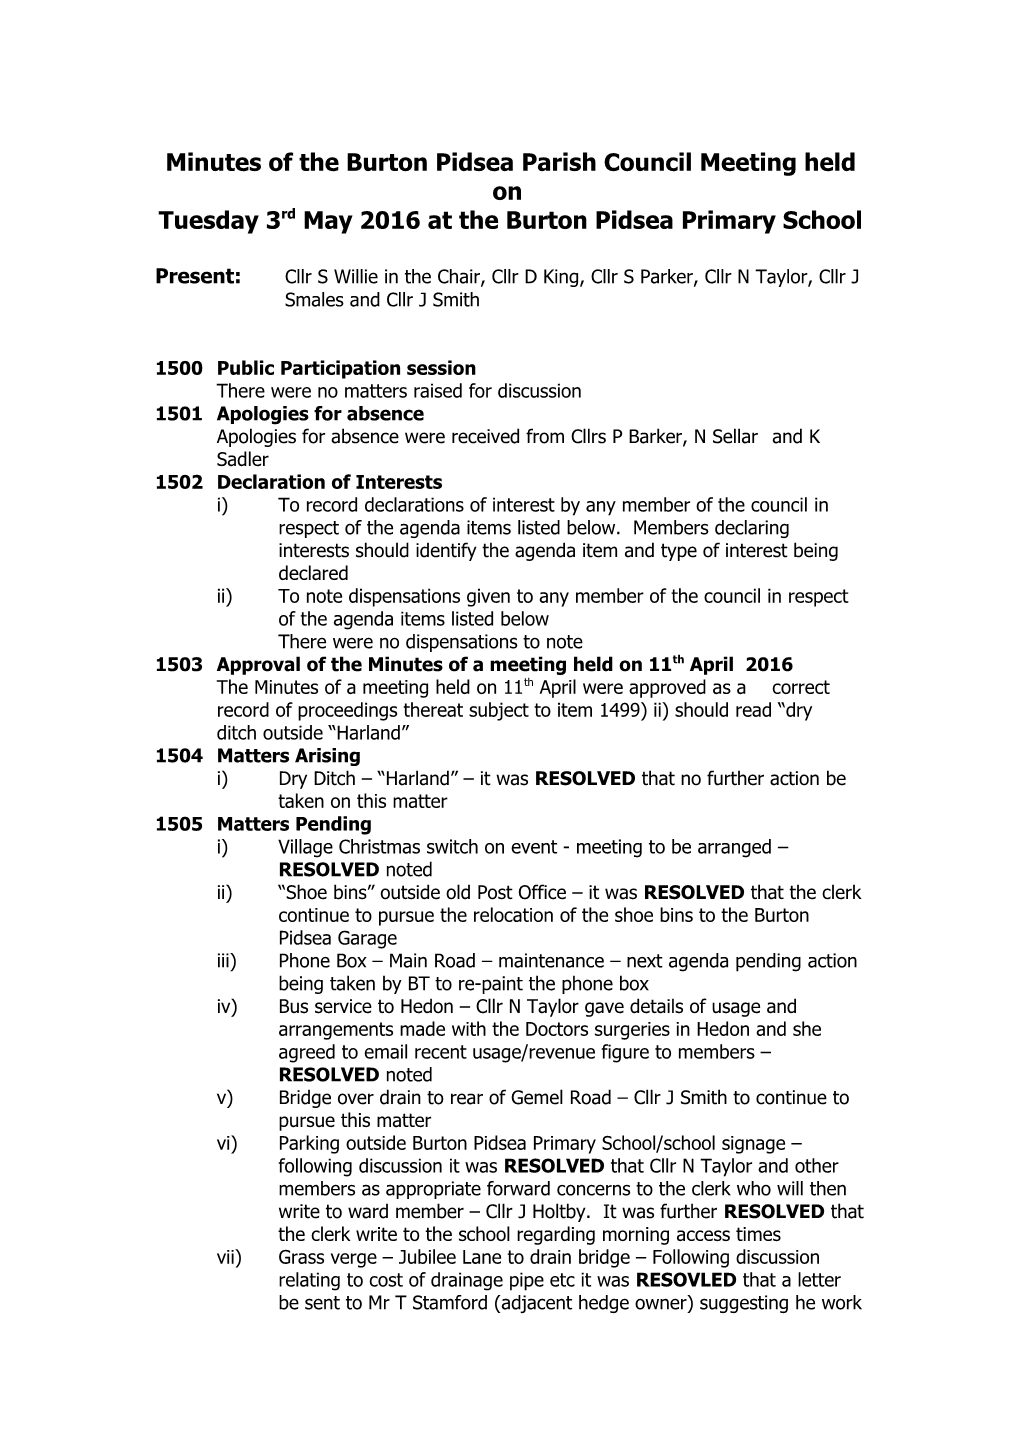 Minutes of the Burton Pidsea Parish Council Meeting Held On